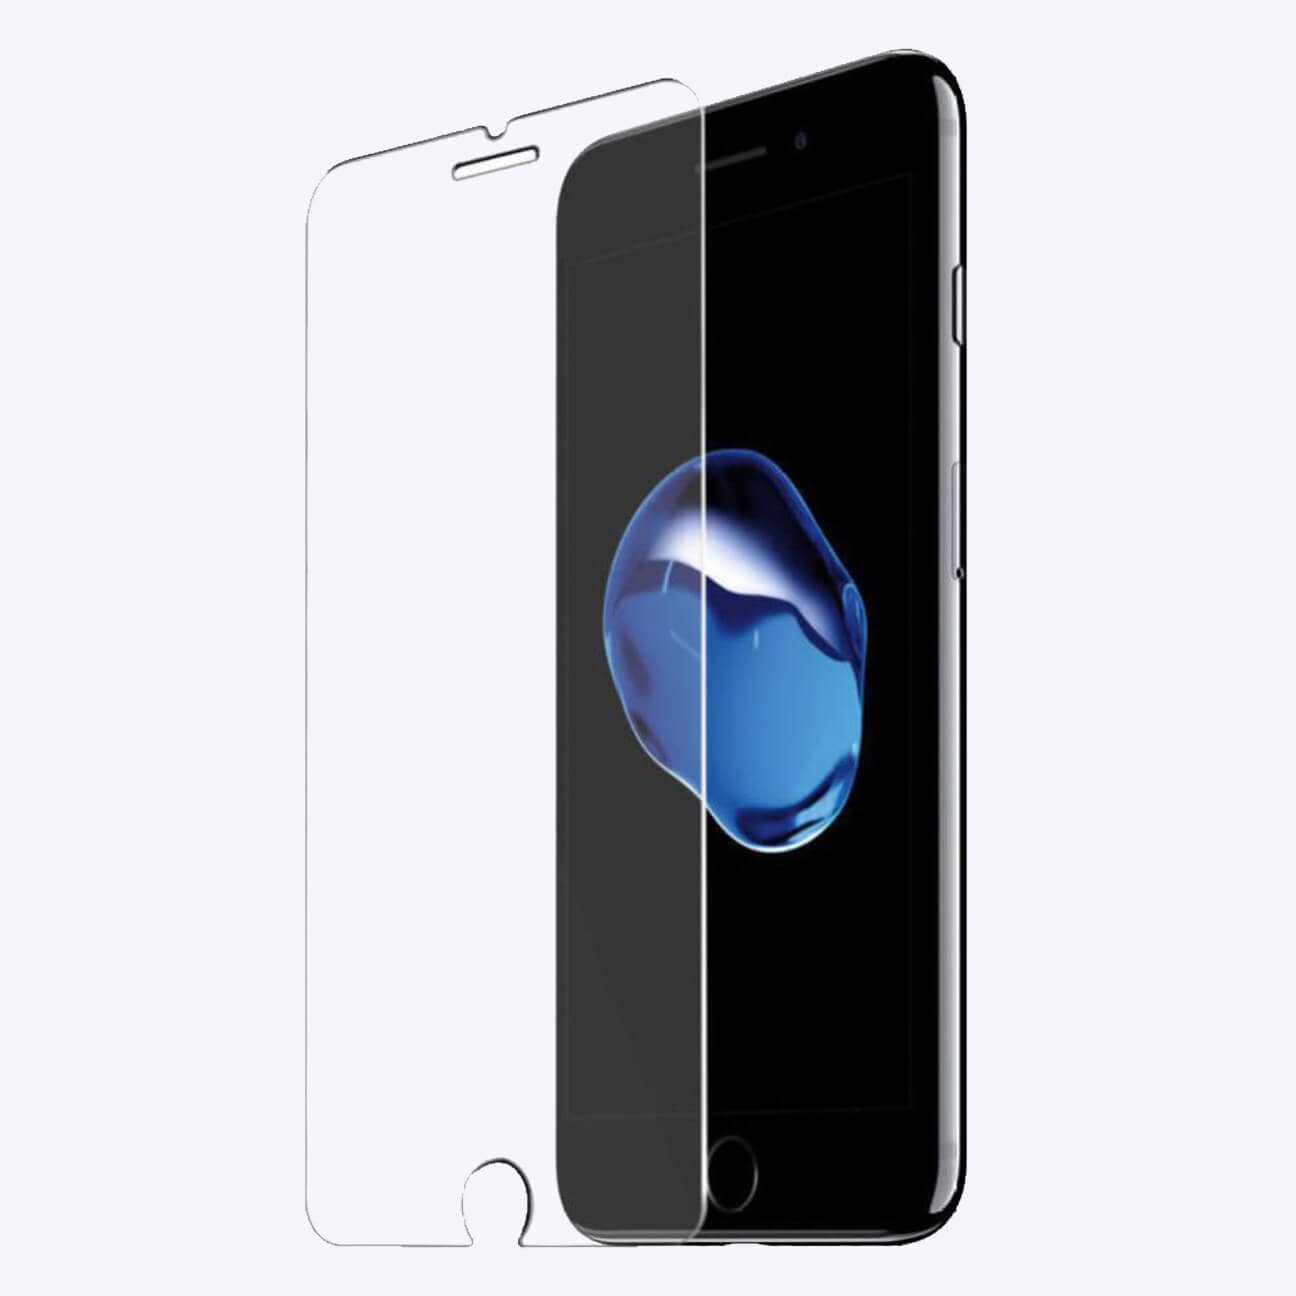 Samsung Galaxy A8 Plus Tempered Glass Screen Protector